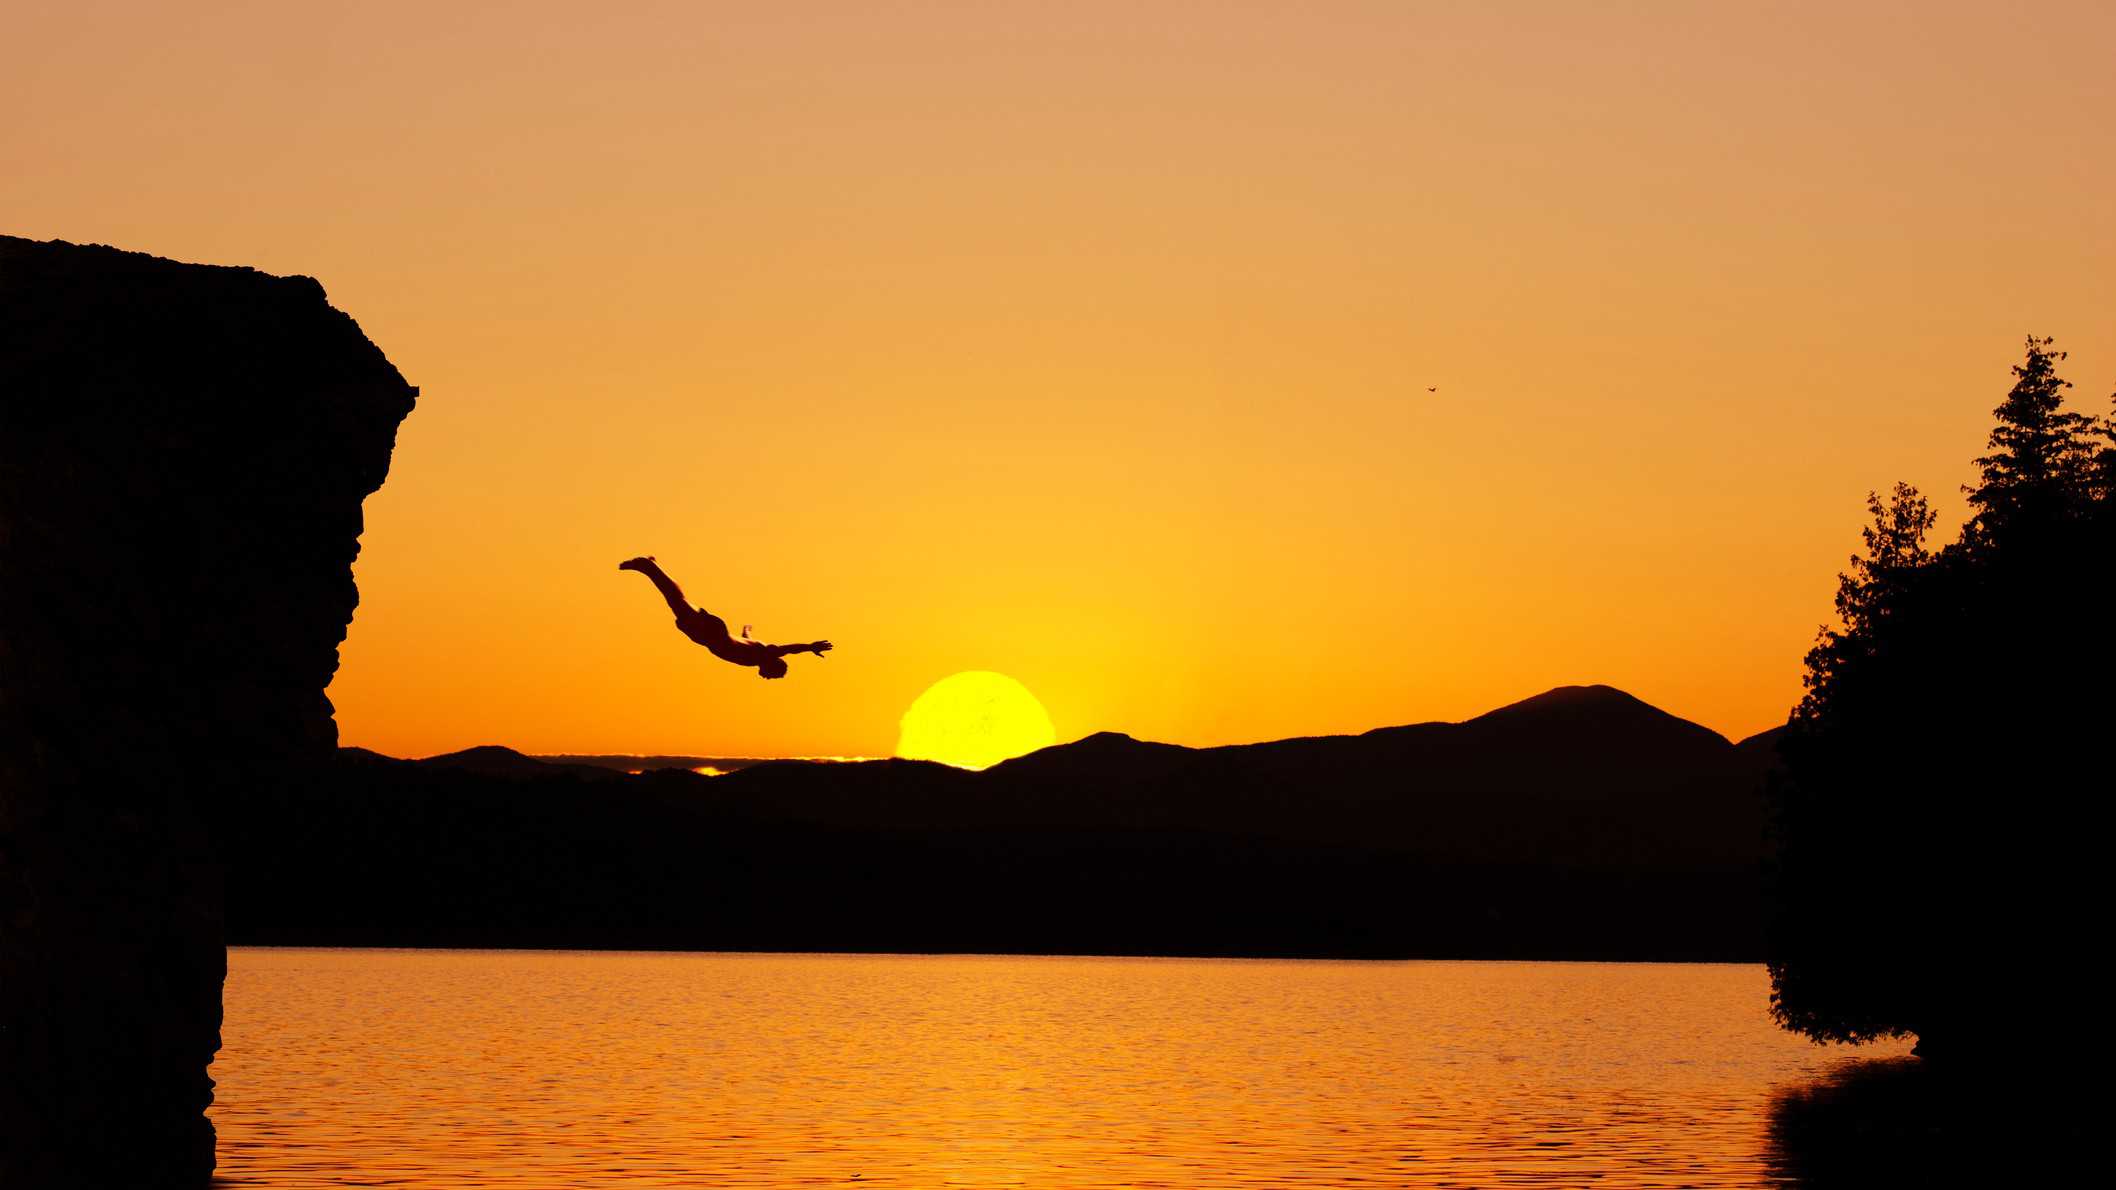 A person dives from a cliff into the water with a golden sunset in the background.